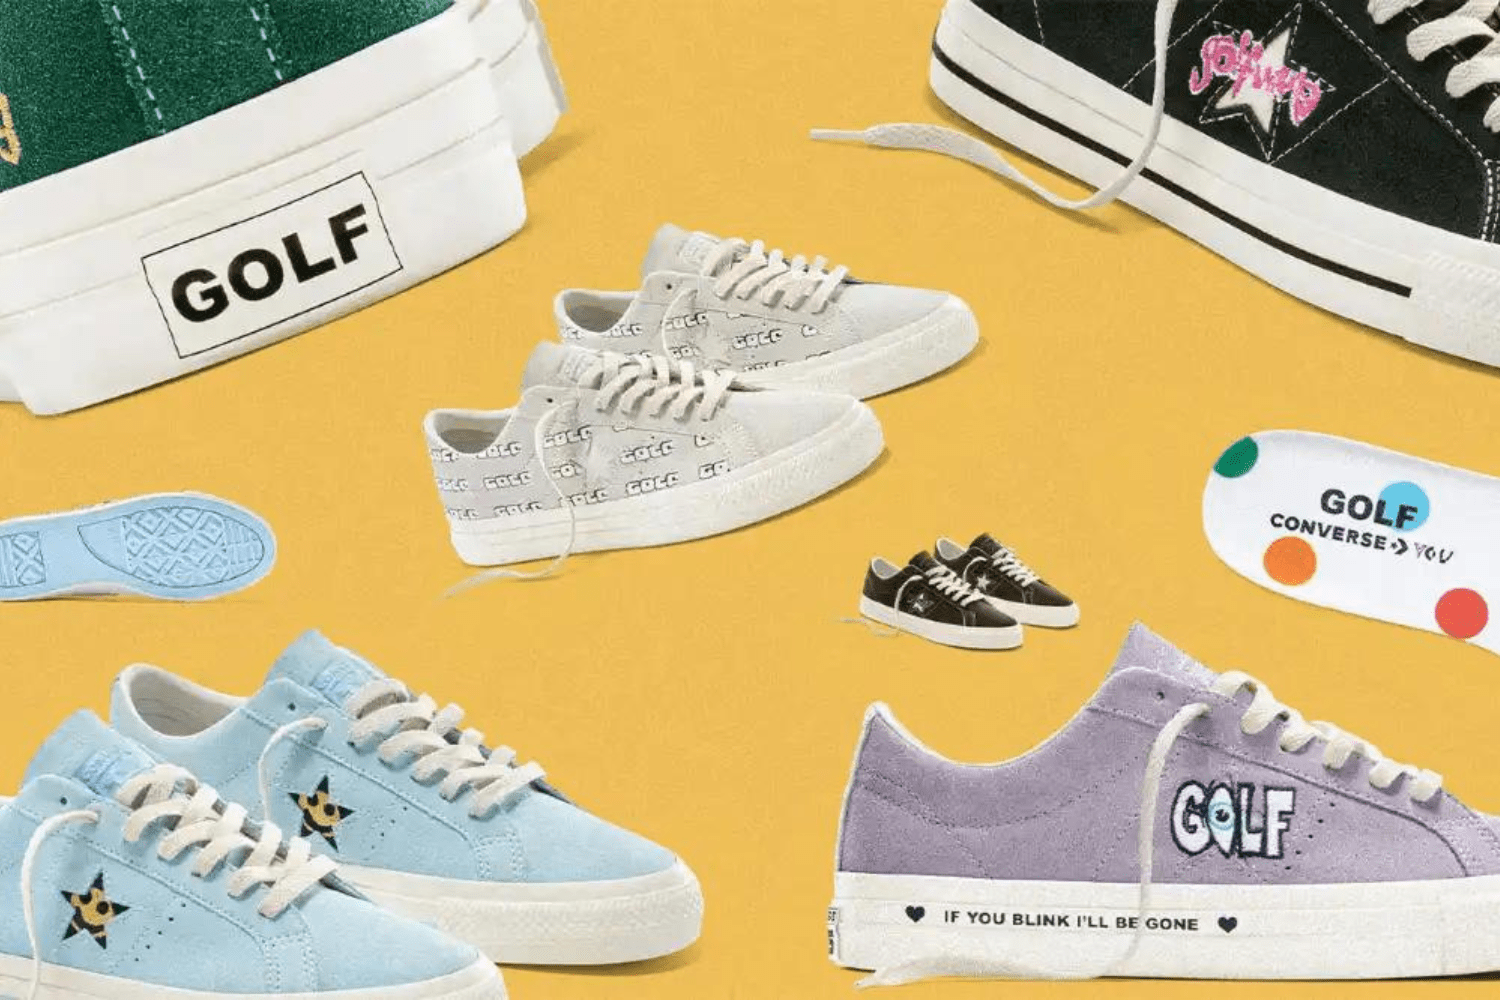 Personalise the Converse One Star Pro By You with GOLF WANG style